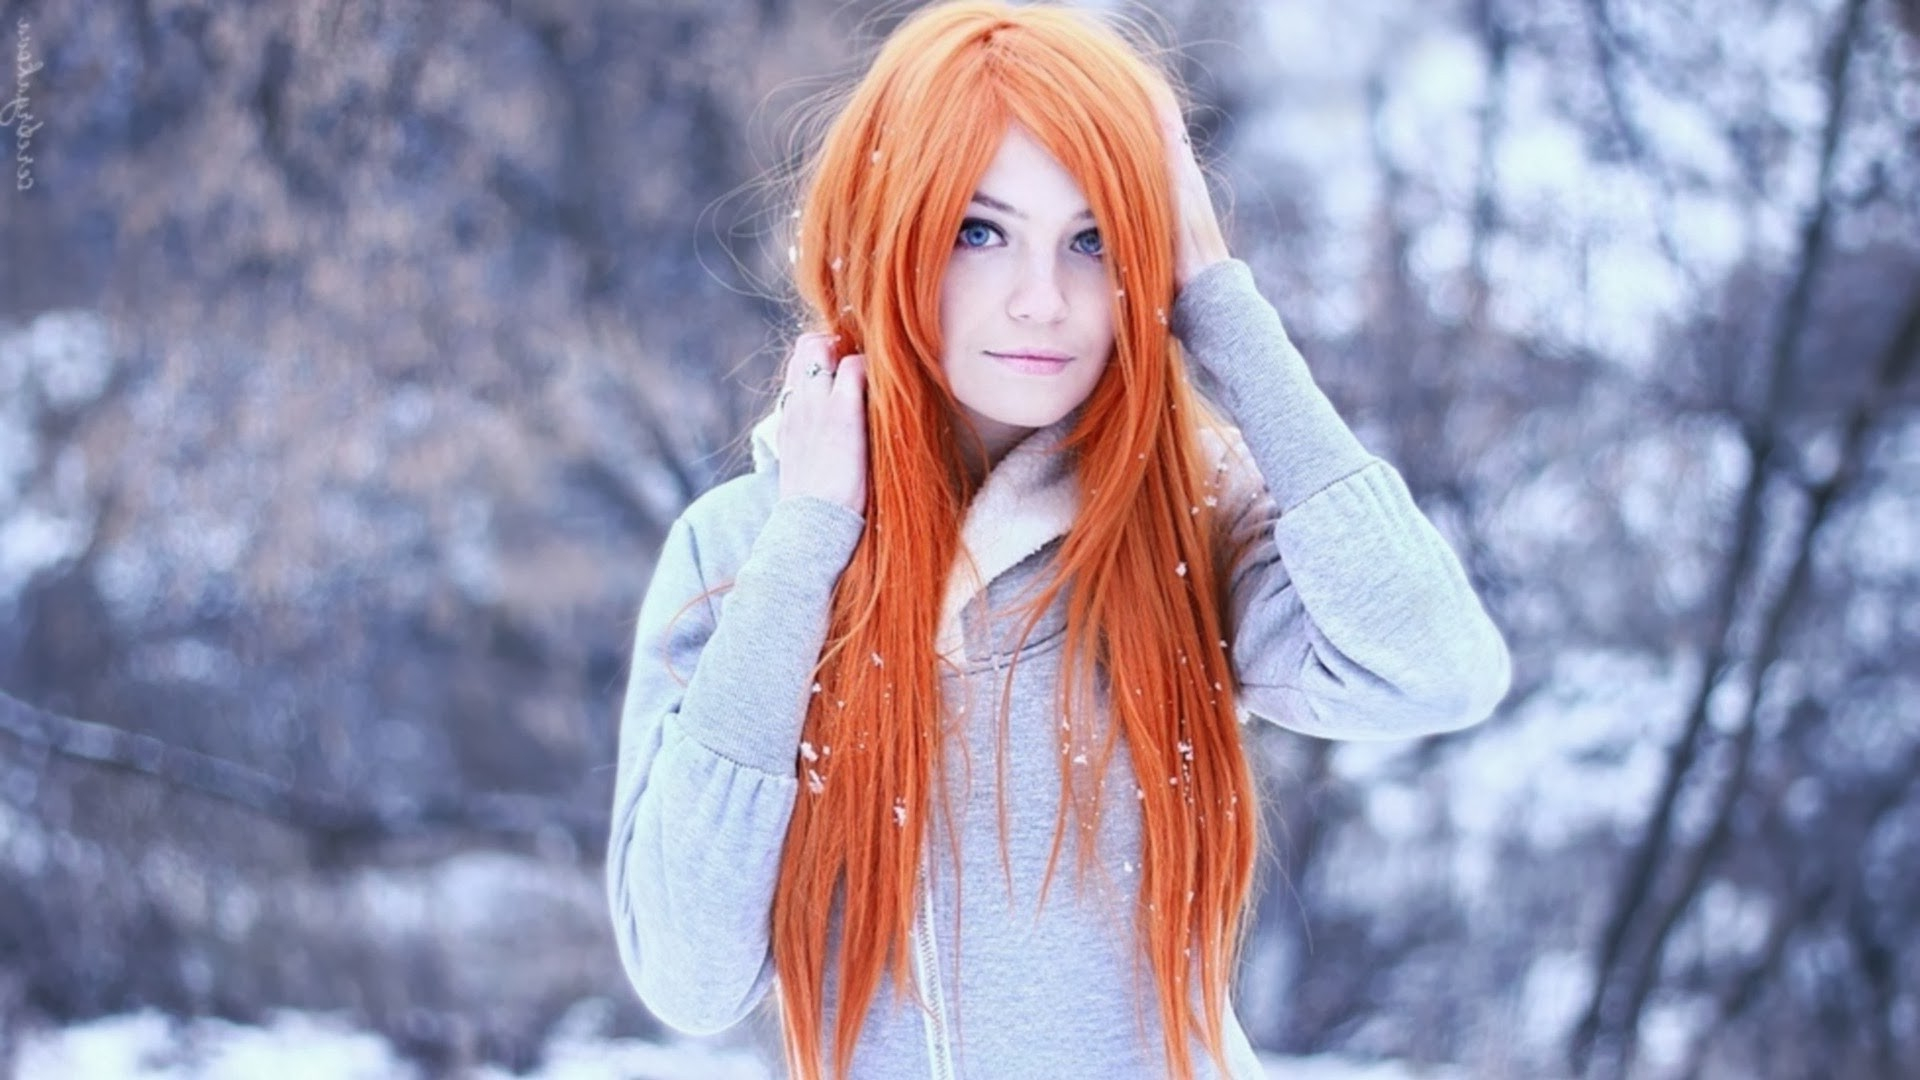 1920x1080 Wallpaper : redhead, model, long hair, anime, snow, winter, fashion, spring, clothing, beauty, season, costume, blond, hairstyle, px, photo shoot, brown hair 4kWallpaper 597873 HD Wallpapers